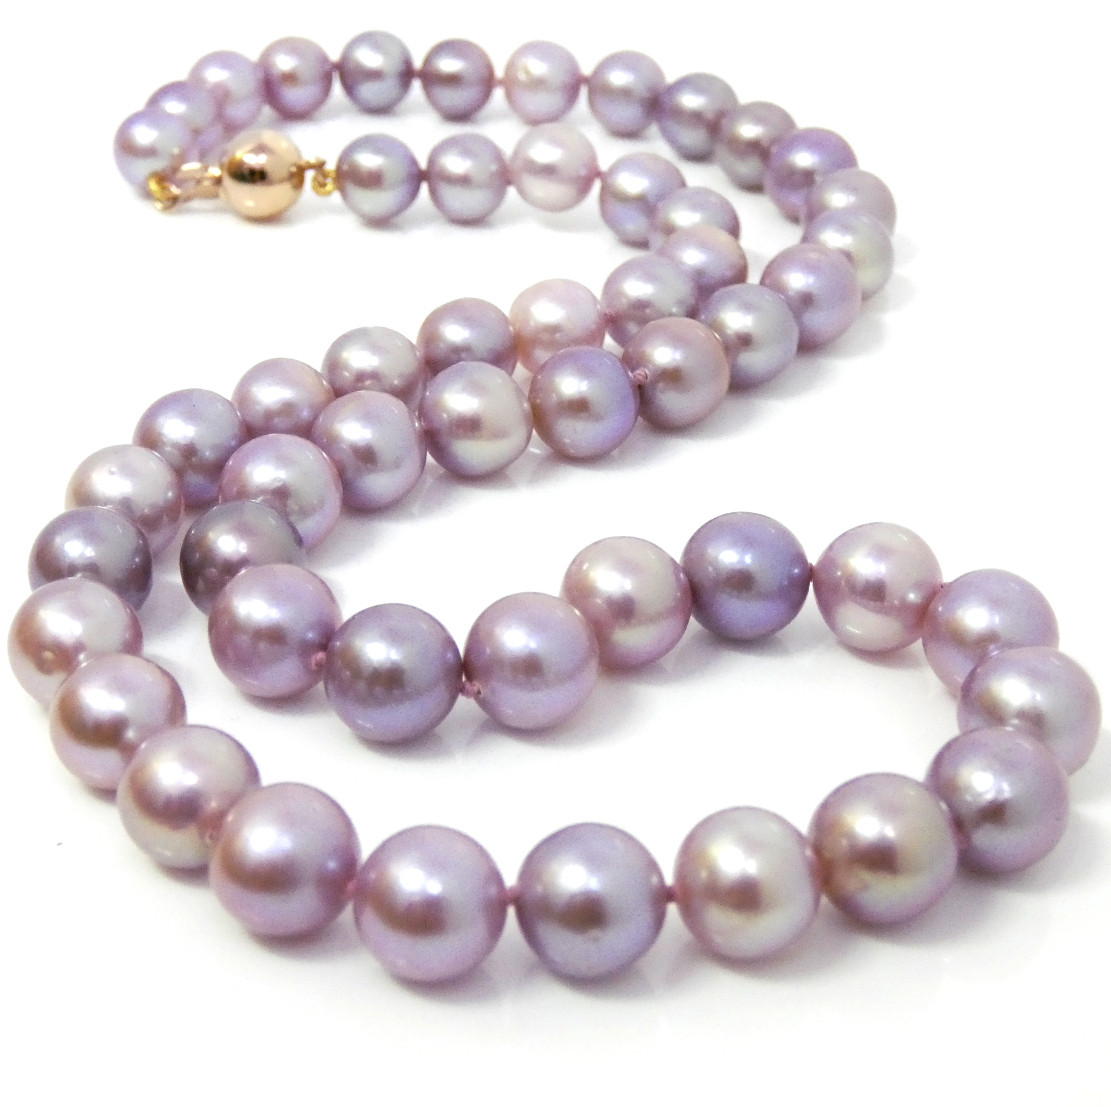 Lilac,Lavender and Mauve Pink Round Edison Pearl Necklace